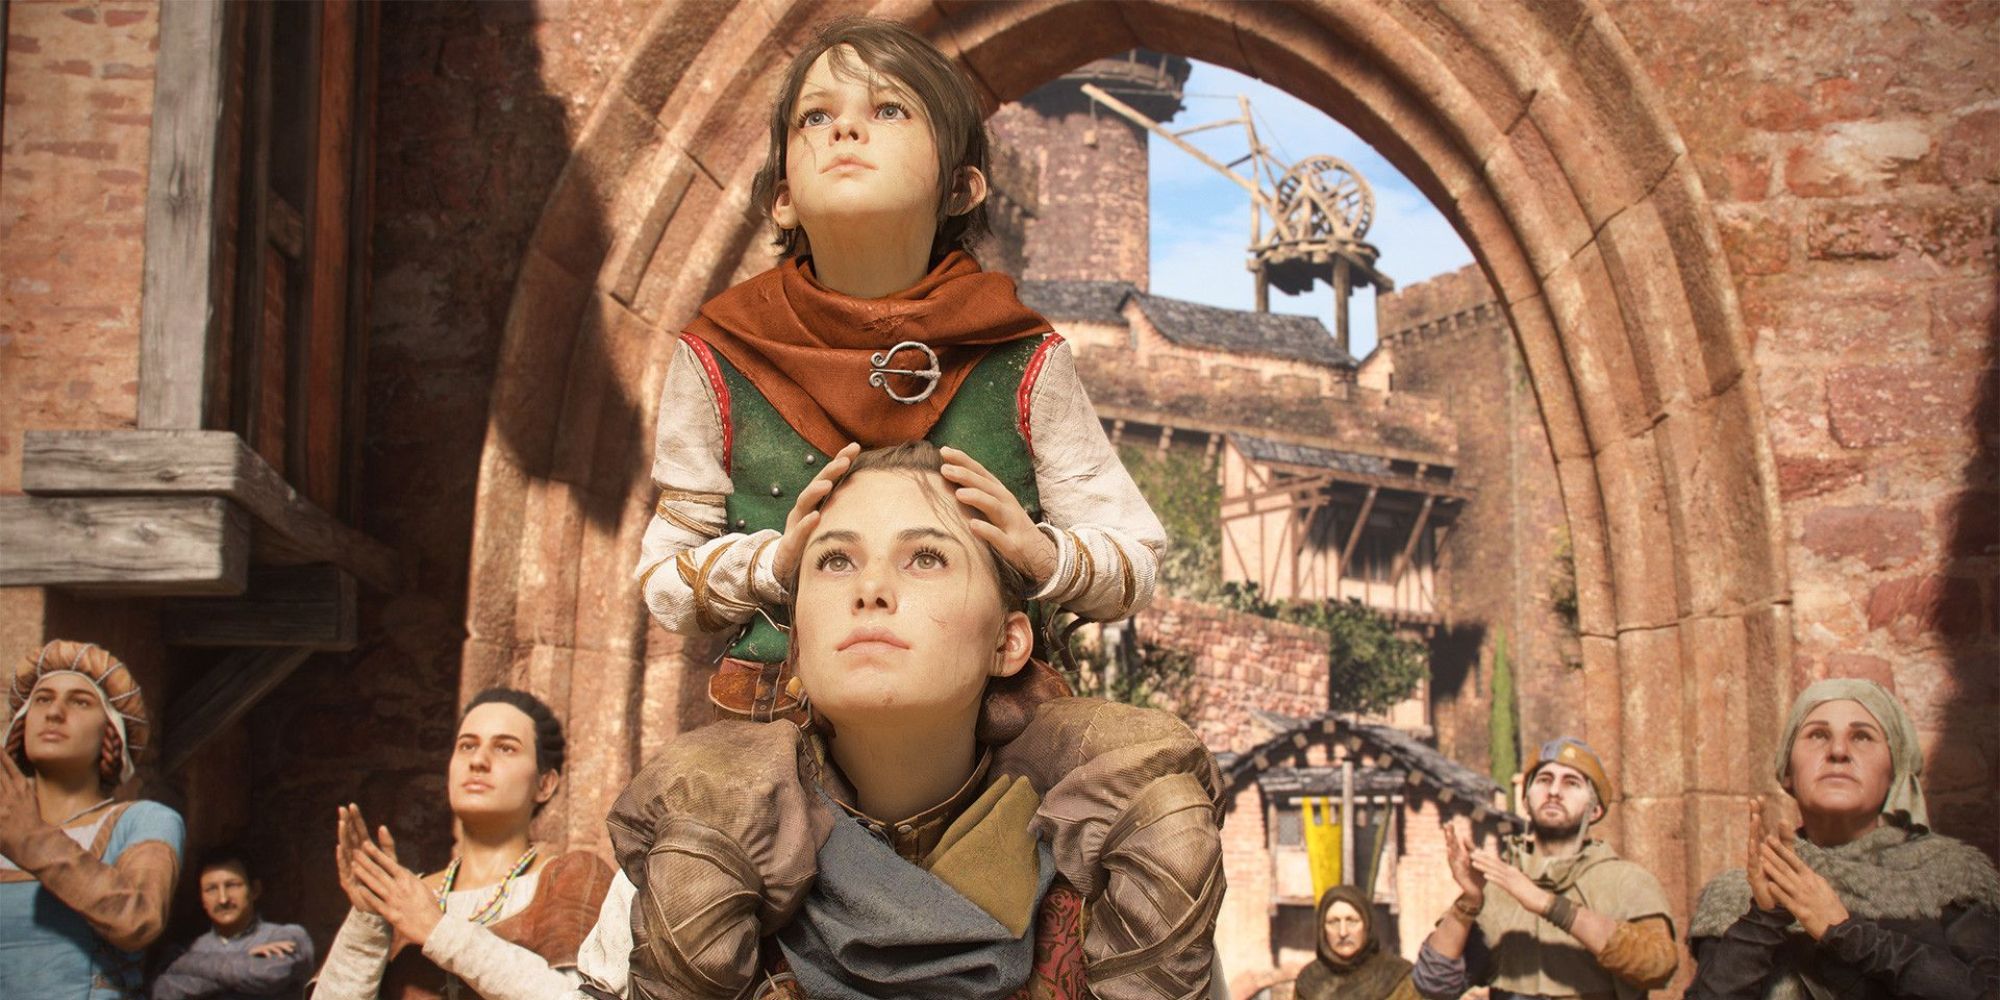 A Plague Tale 3 Seems to Be in Development